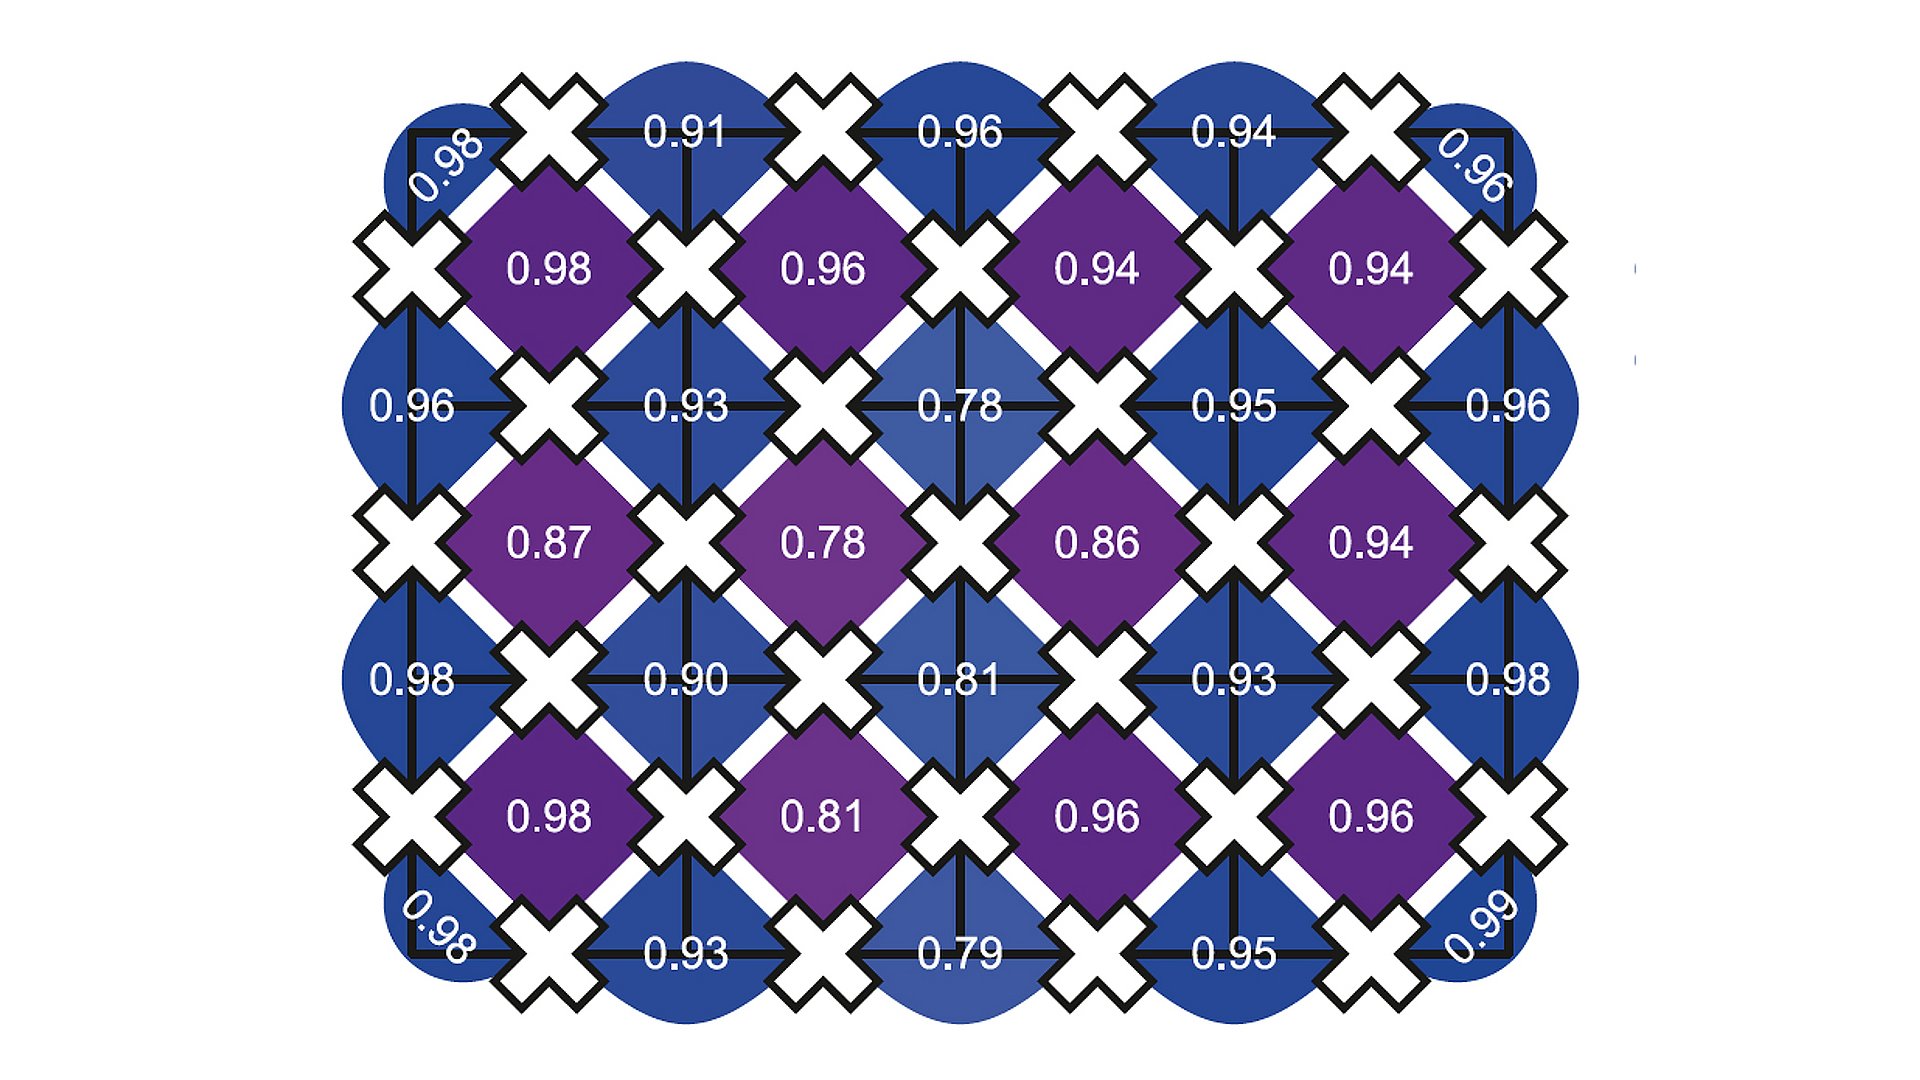 Measured parity values for a 31-qubit lattice in the toric code ground state. The qubits (“×”) are placed on a square lattice. The parity expectation values of the star- and plaquettes operators are shown as blue and purple tiles, respectively. The average value of 0.92 ± 0.06 on all tiles shows that the simulation comes very close to the ground state with an exact parity of 1.0.